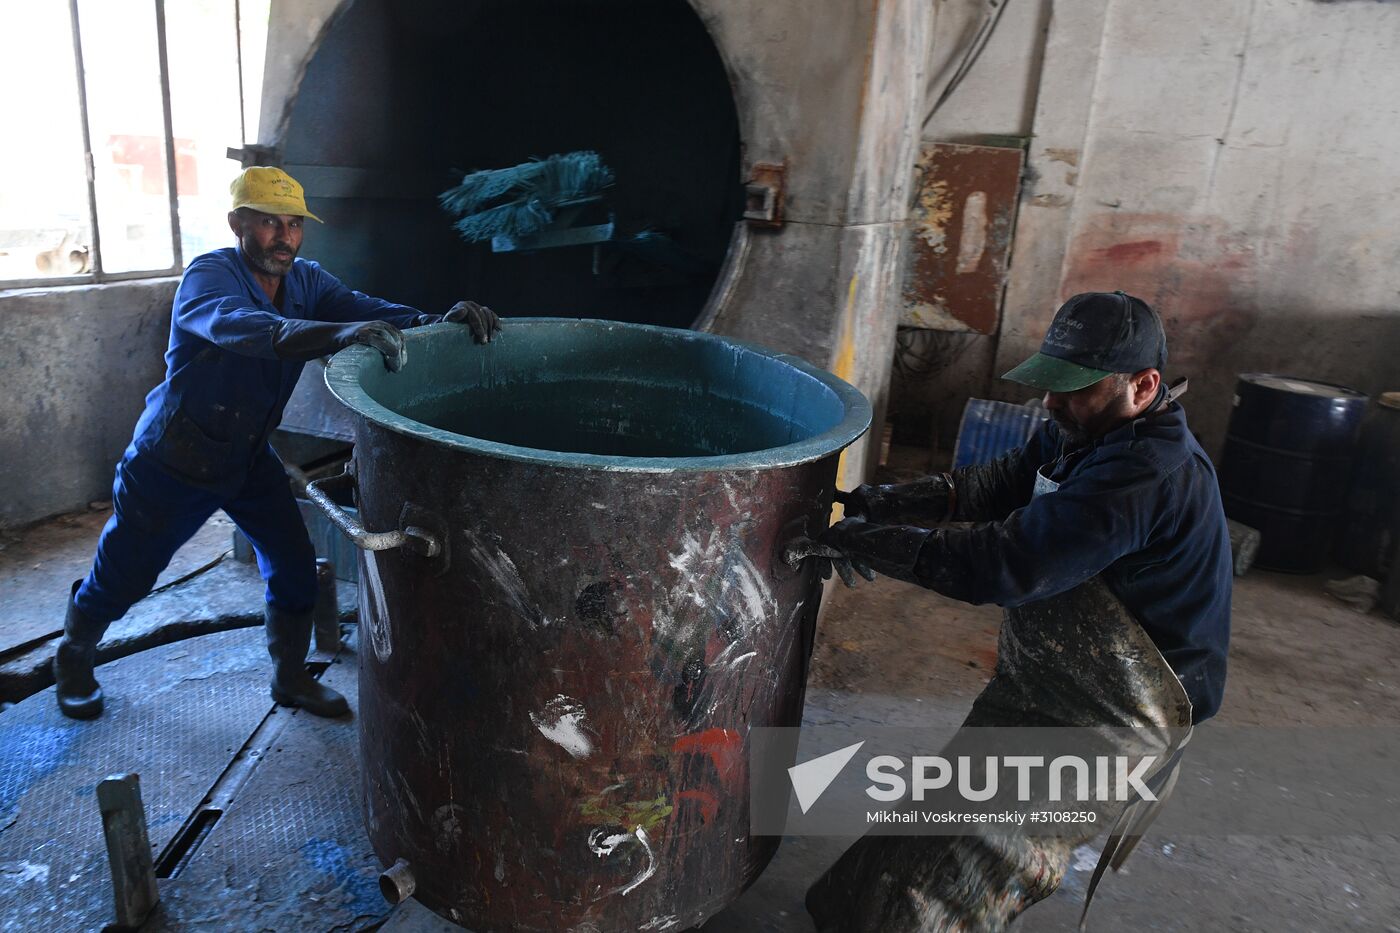 Paint factory in Damascus suburb